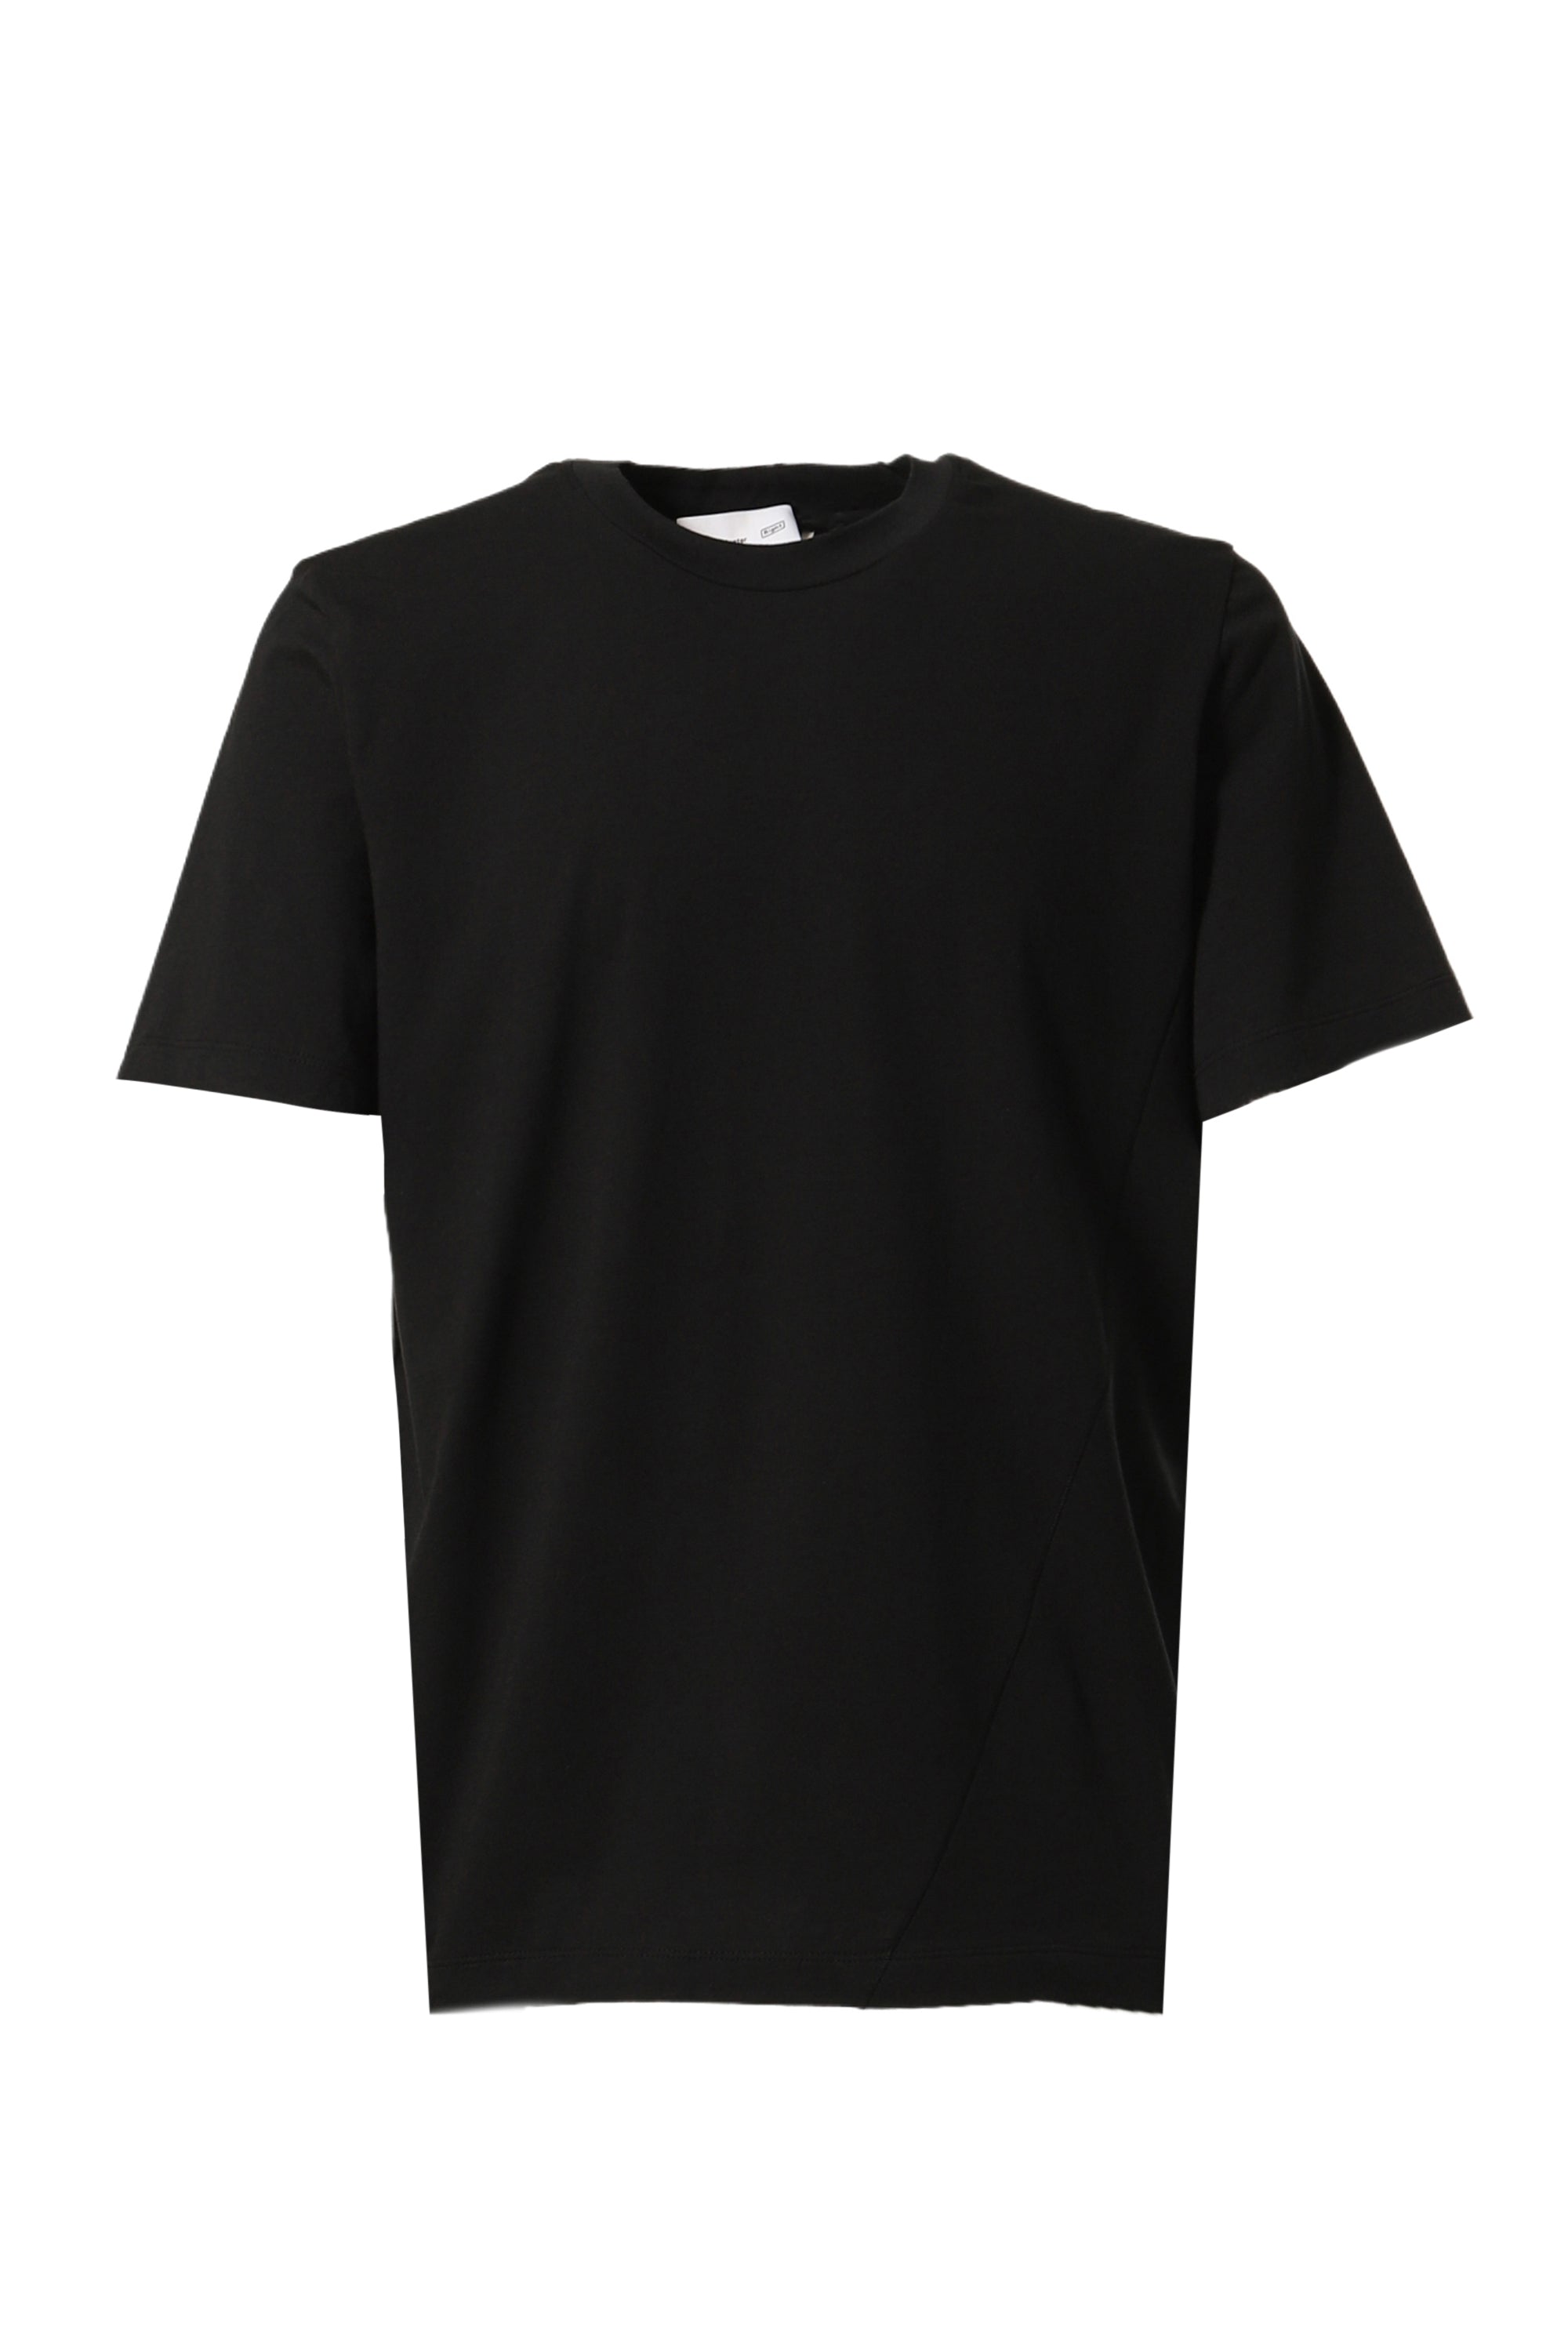 6.0 TEE RIGHT / BLK - POST ARCHIVE FACTION (PAF)